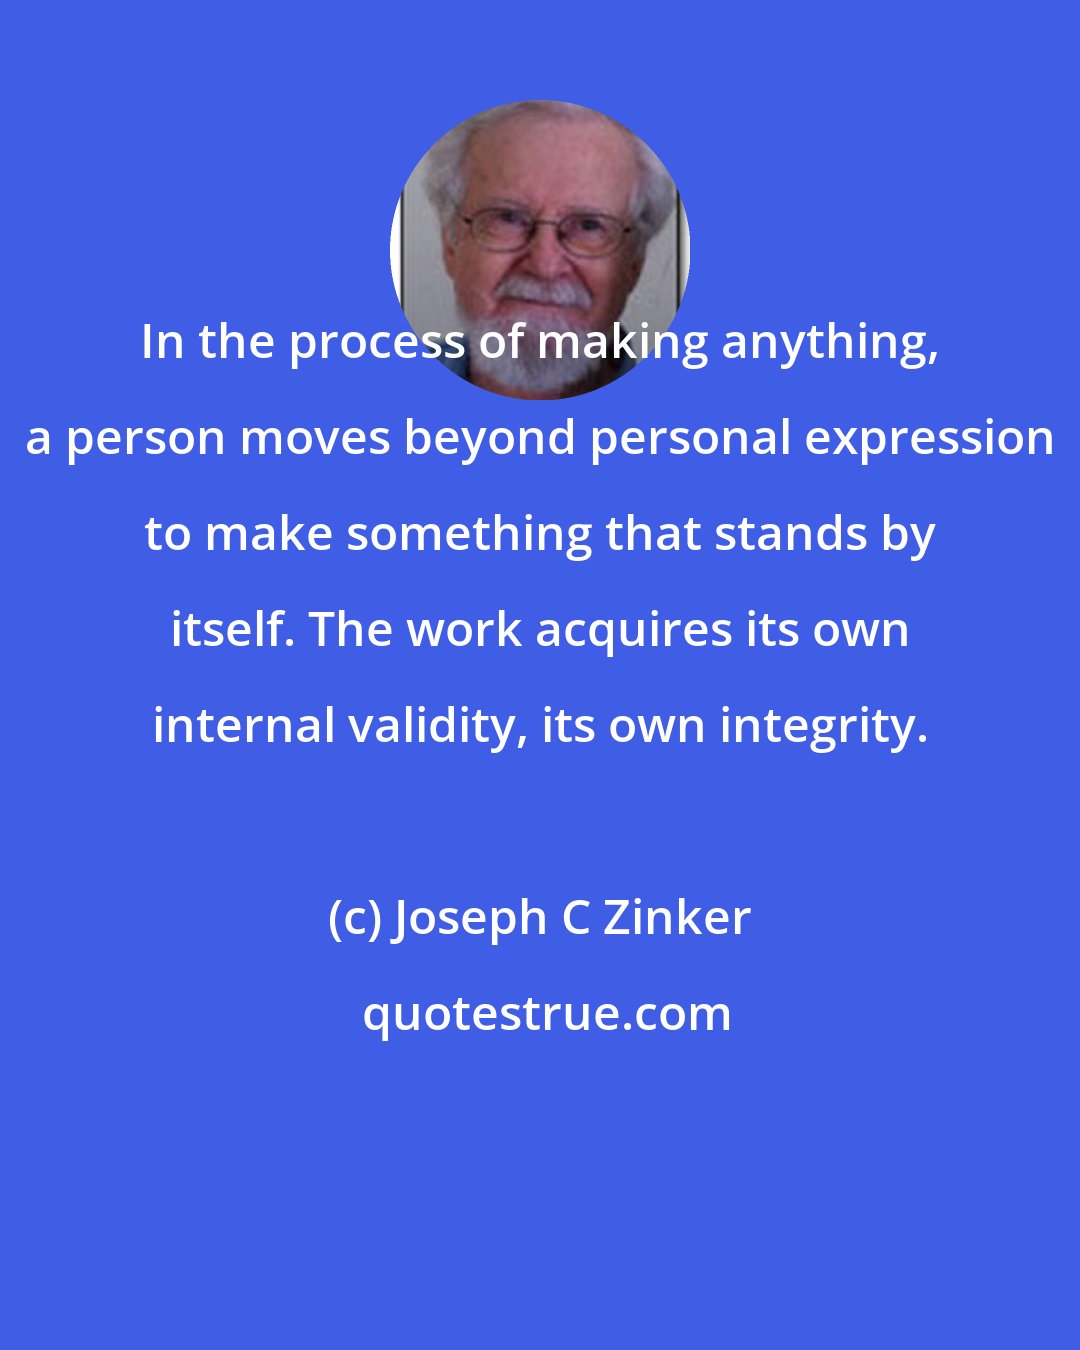 Joseph C Zinker: In the process of making anything, a person moves beyond personal expression to make something that stands by itself. The work acquires its own internal validity, its own integrity.